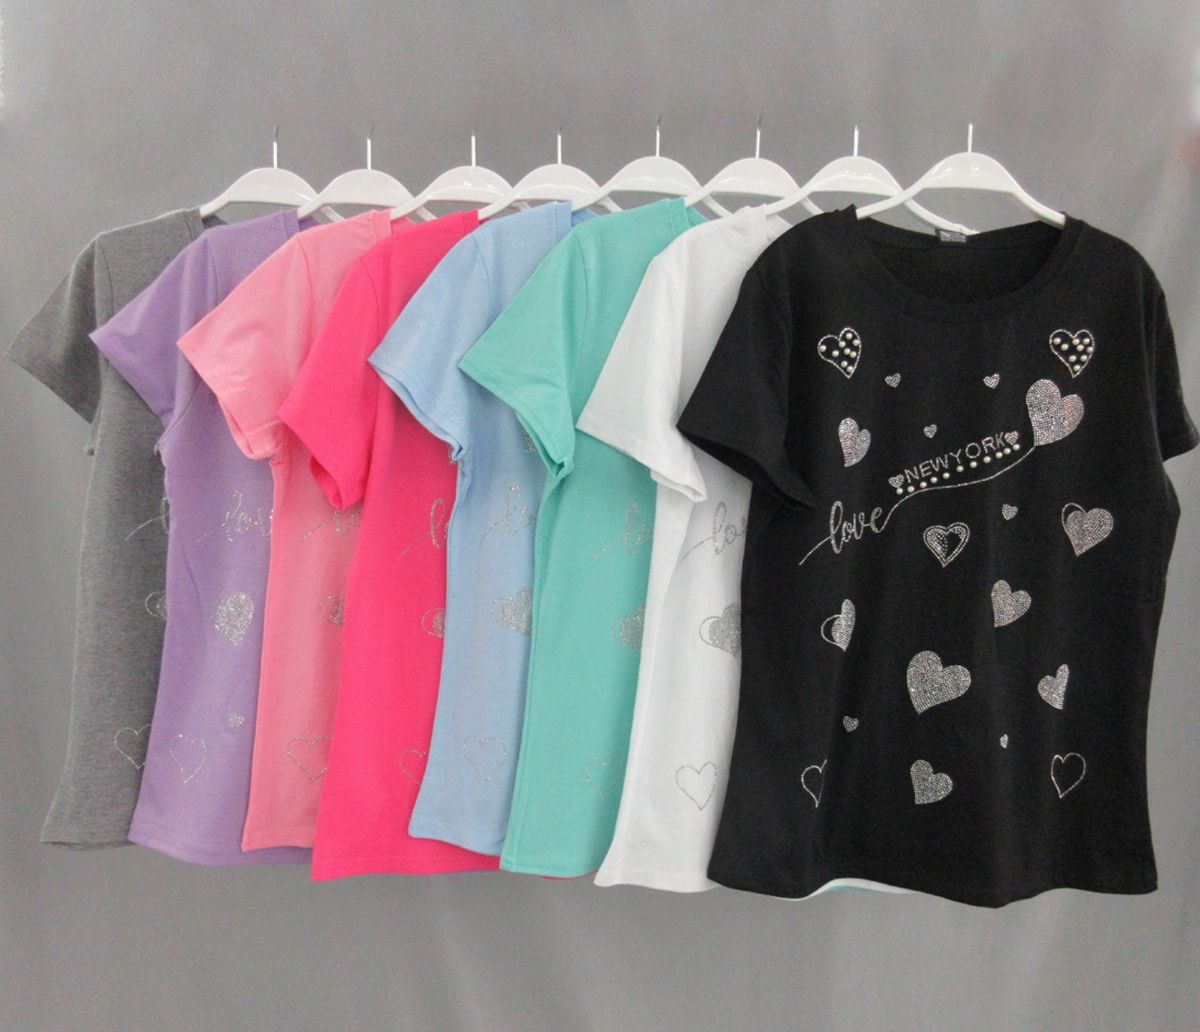 12 Pieces of Women's T-Shirt Graphic Tee L/xl